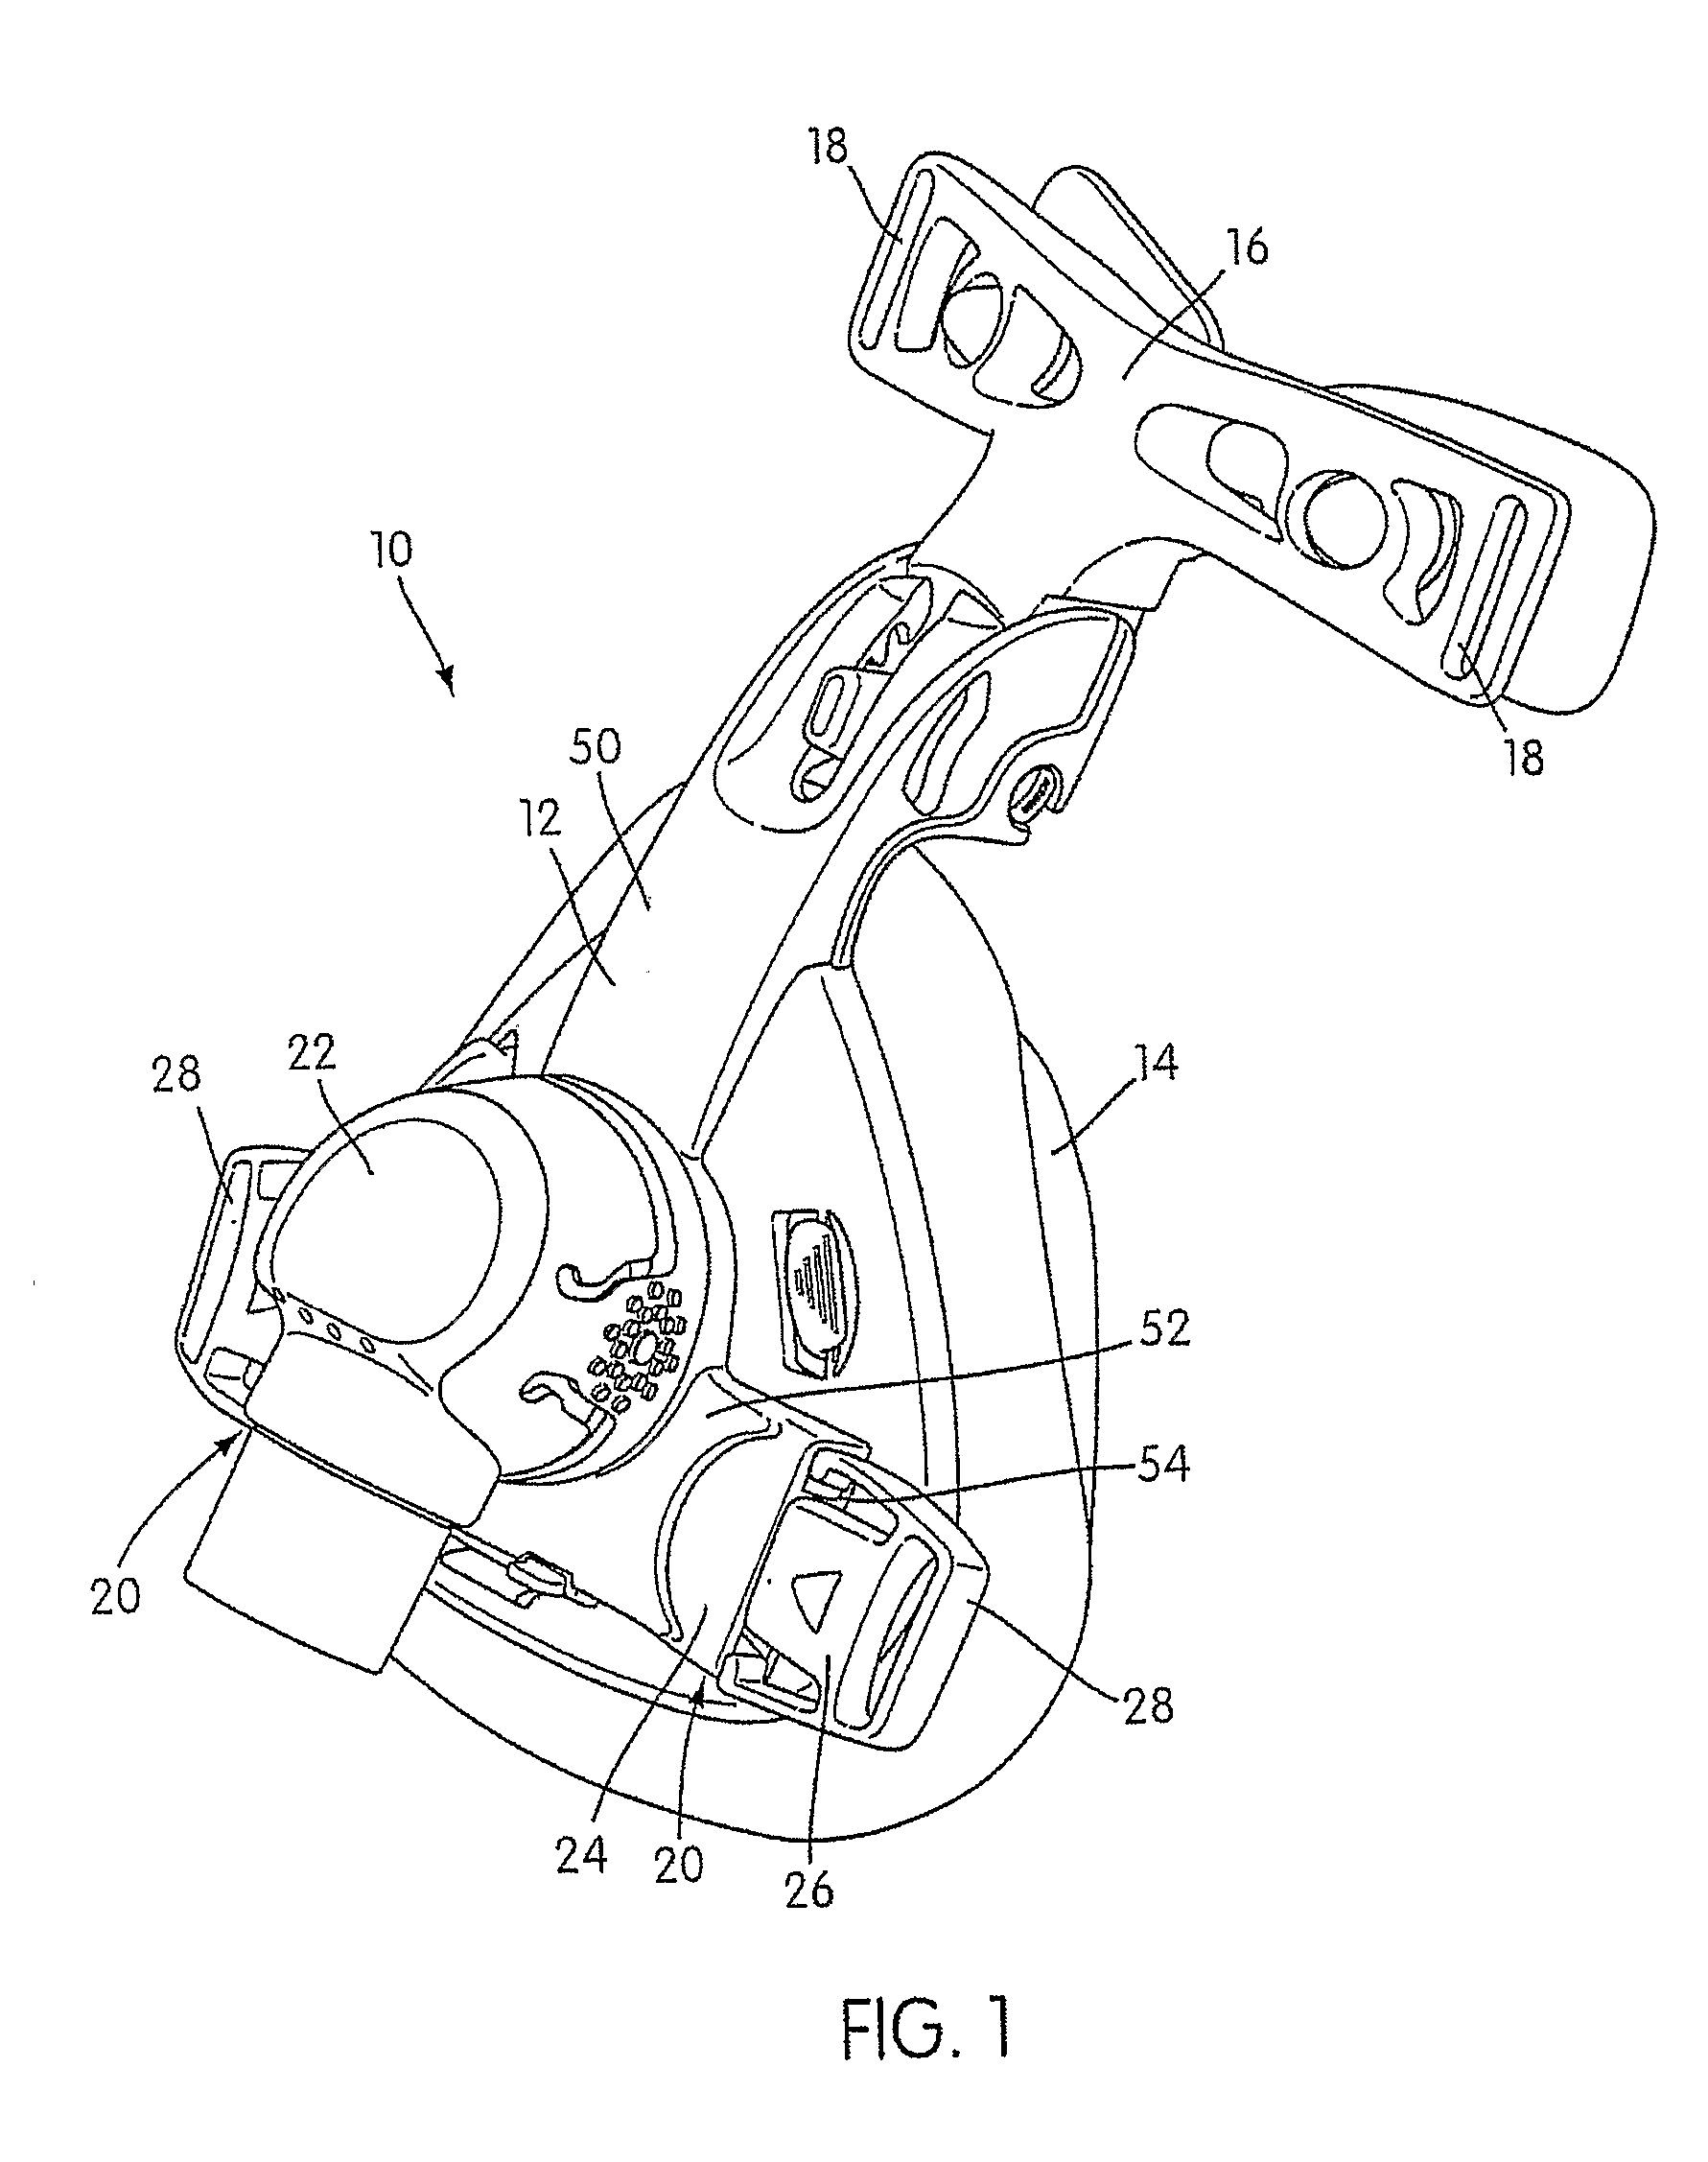 Headgear connection assembly for a respiratory mask assembly